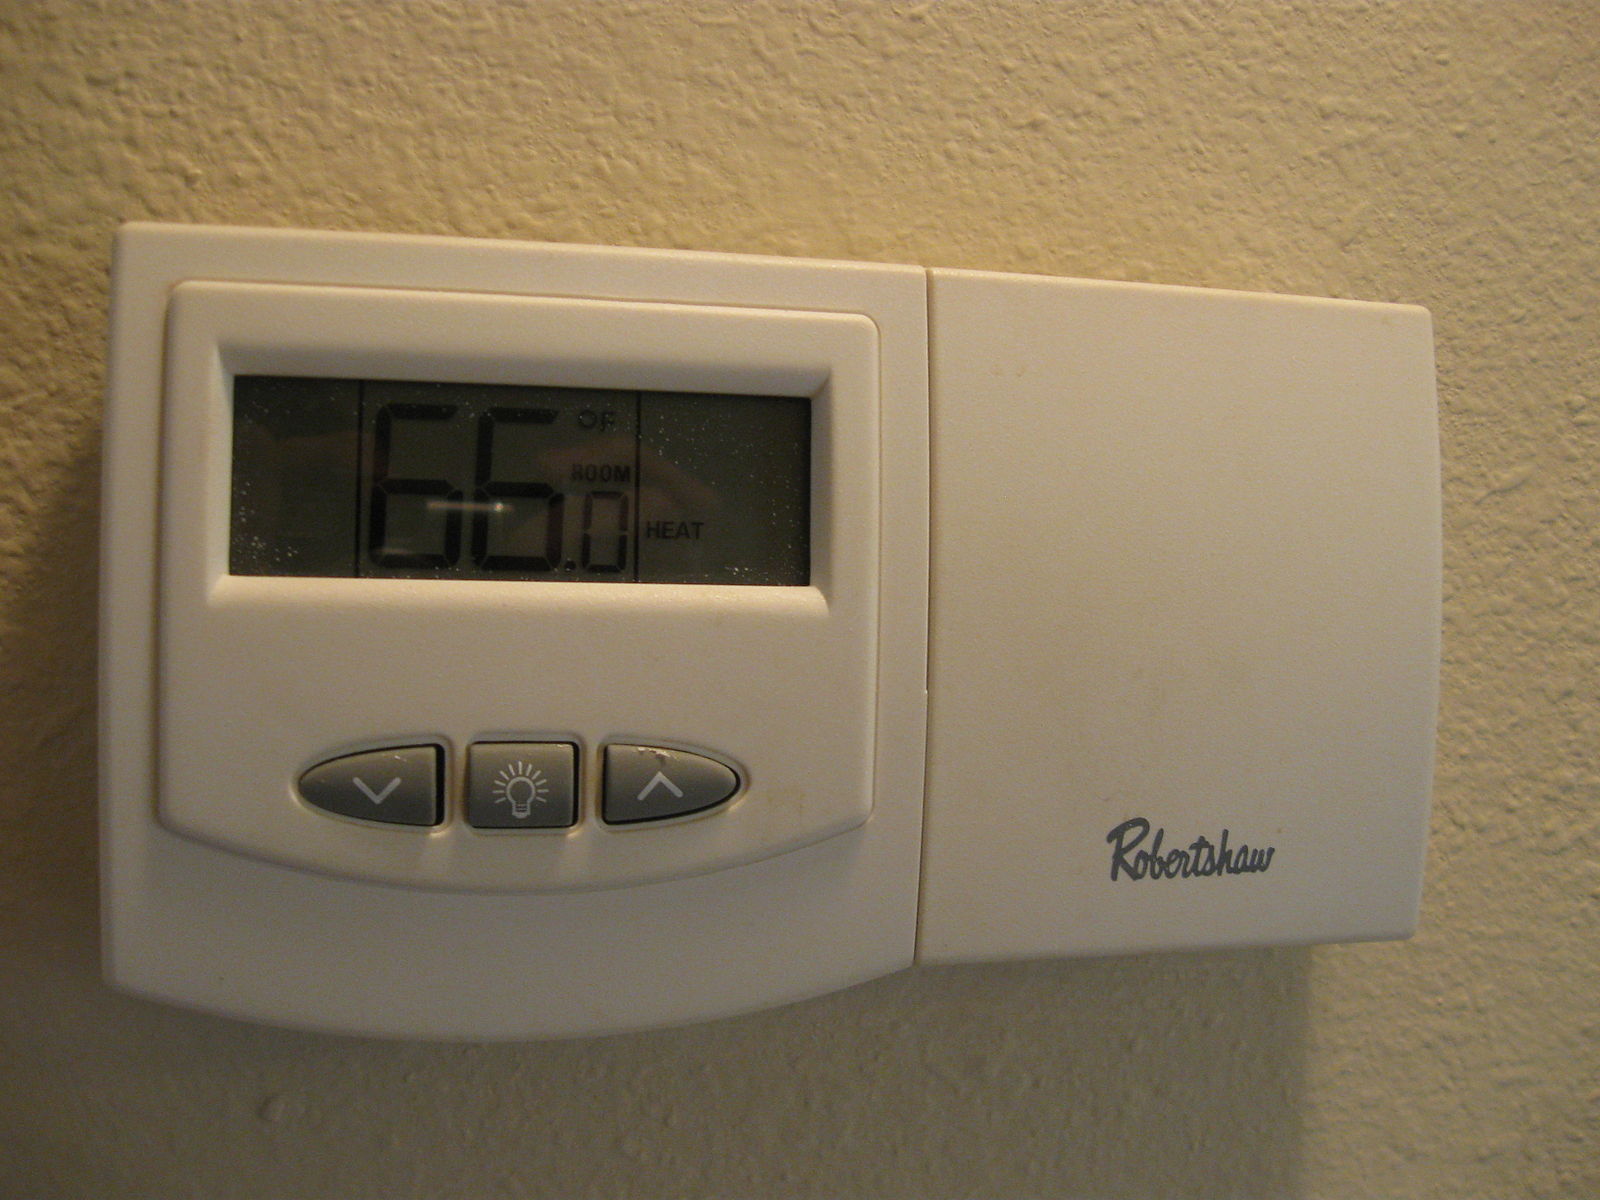 why thermostat says delayed